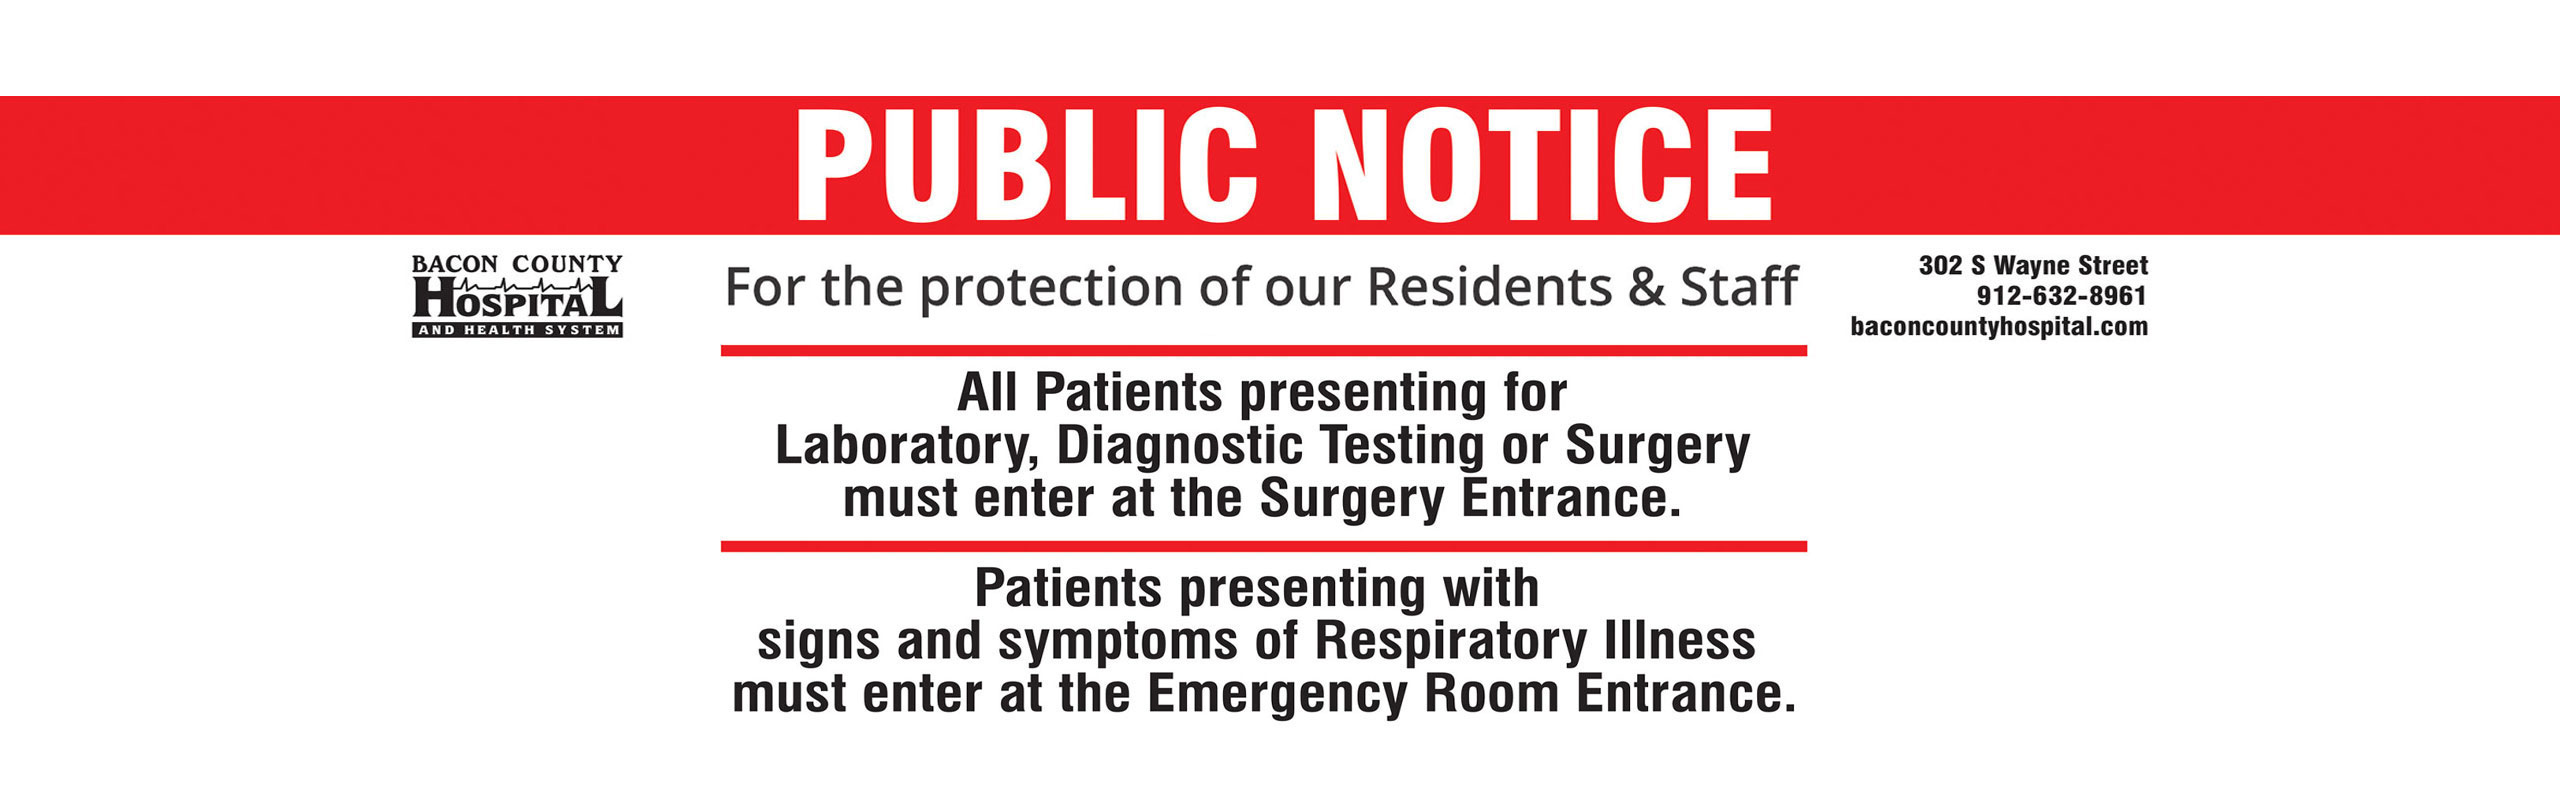 PUBLIC NOTICE
For the protection of our Residents and Staff

All patients presenting for Laboratory, Diagnostic Testing or Surgery must enter at the Surgery Entrance.
Patients presenting with signs and symptoms of Respiratory Illness must enter at the emergency room entrance.

302 South Wayne Street
912-632-8961
baconcountyhospital.com